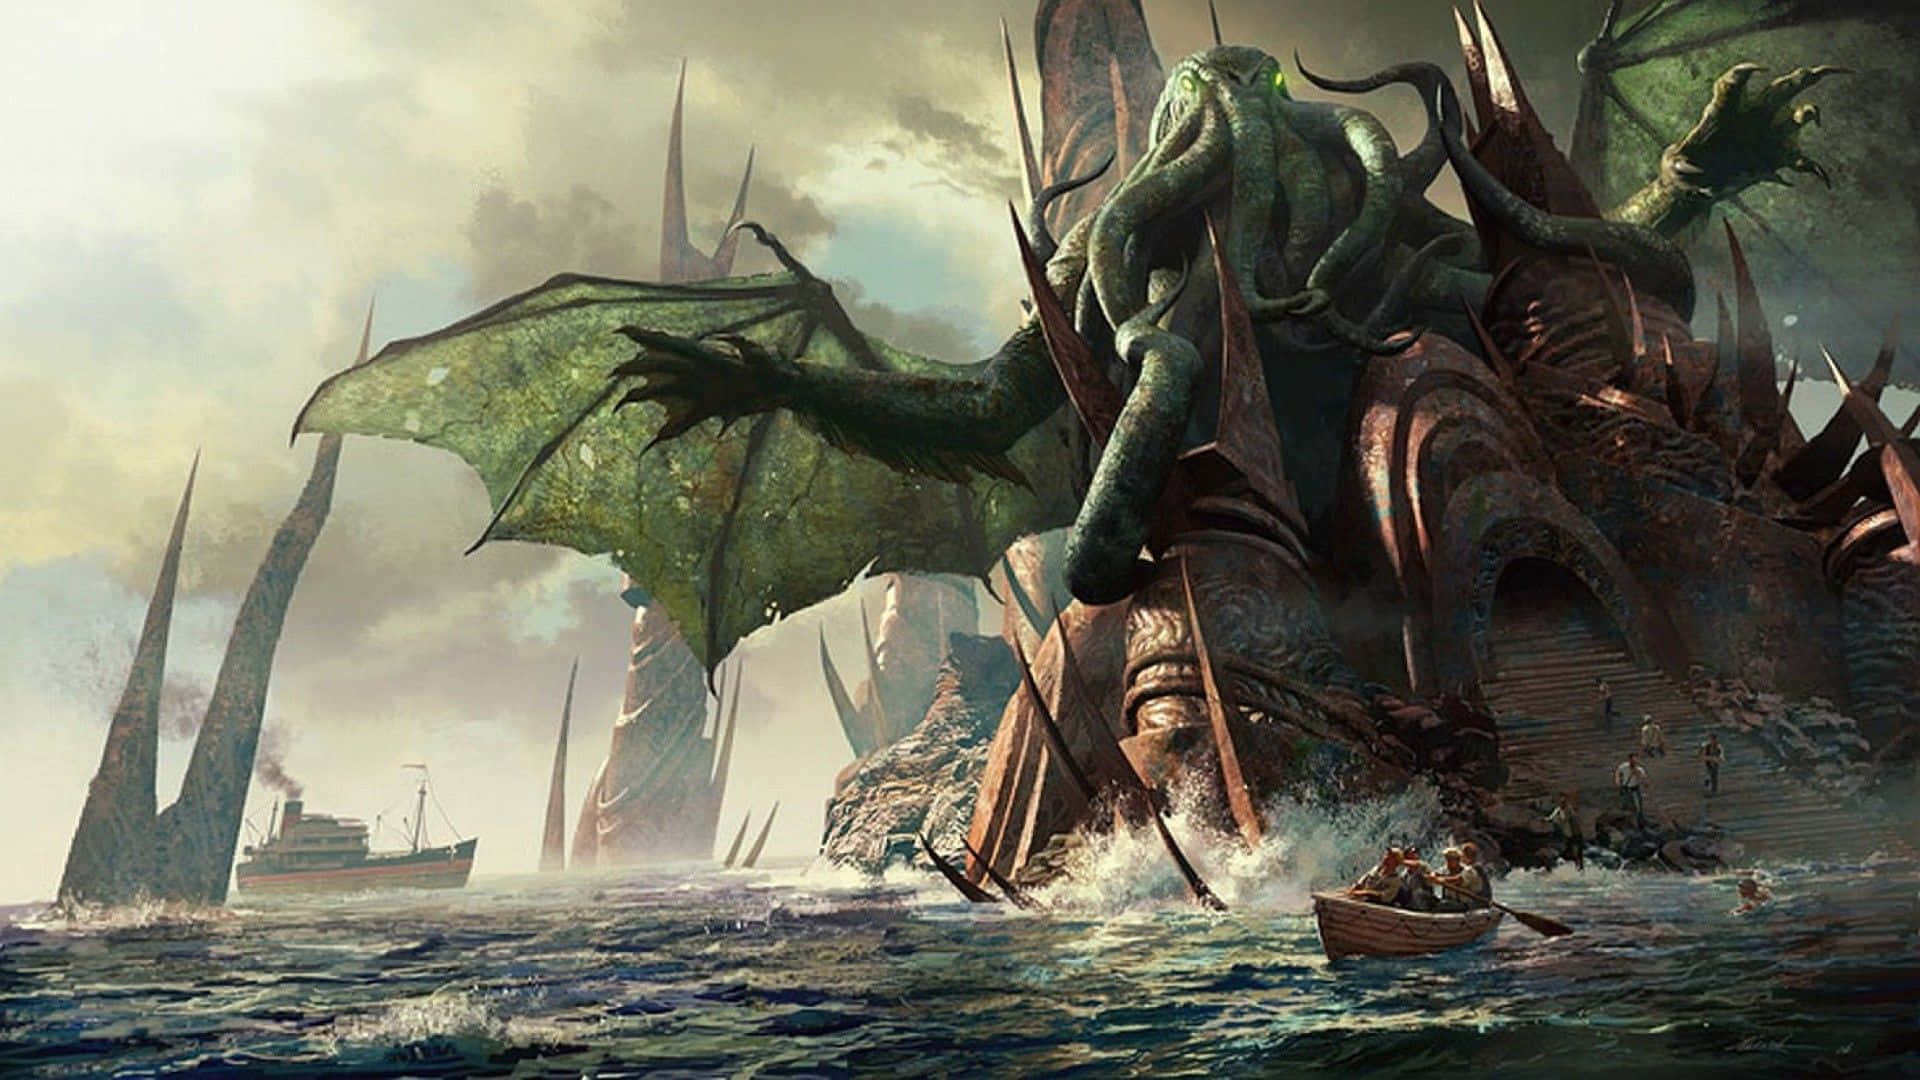 “Behold, Cthulhu - the ancient creature of myth and legend”